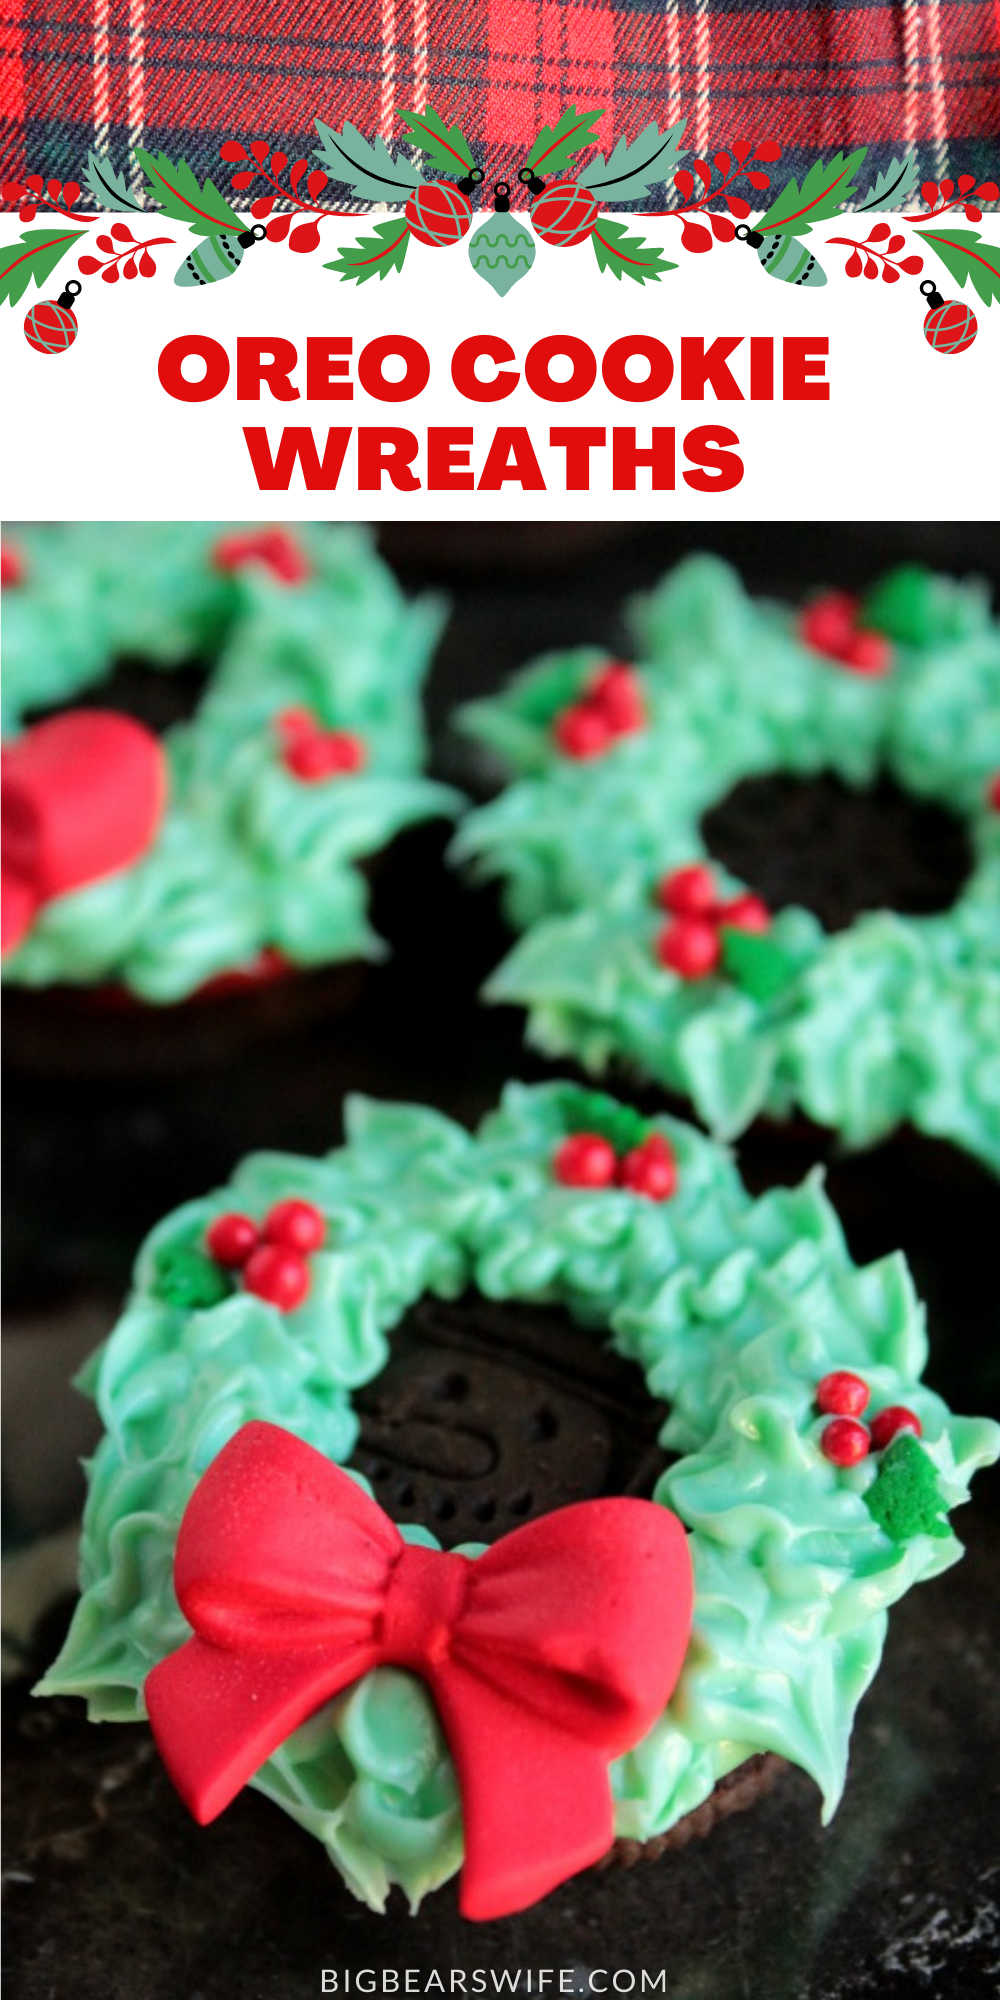  These no bake Christmas cookies are so cute to make and share with everyone this holiday season! No real decorating skills required! via @bigbearswife